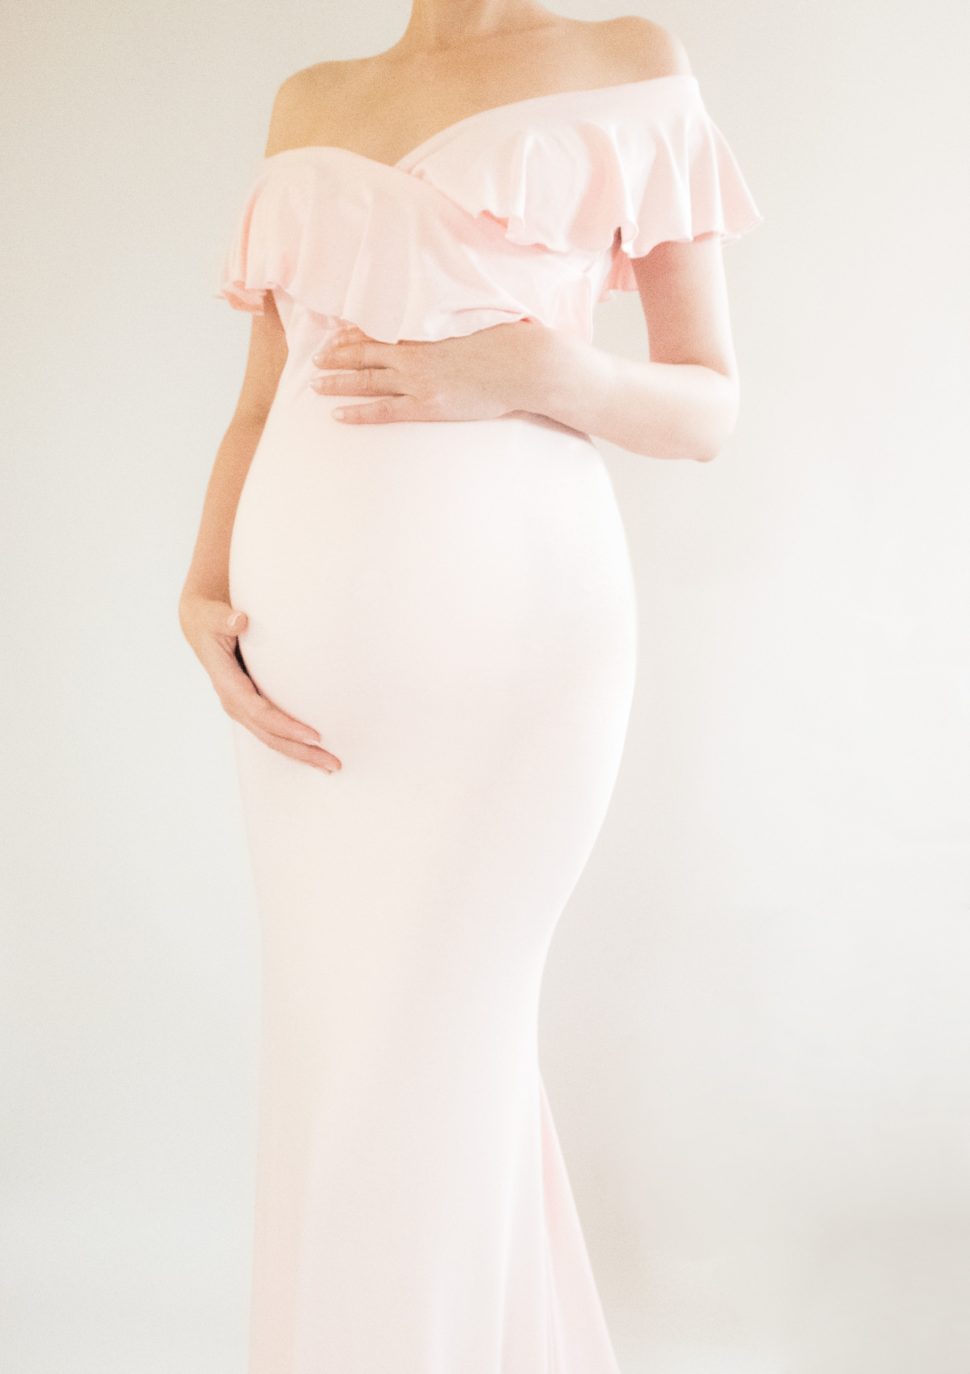 Medium Size of Baby Shower:what To Wear To A Baby Shower In October Mom And Dad Baby Shower Outfits Petite Maternity Dresses For Baby Shower Maternity Blouses For Baby Shower Pink Maternity Dress Baby Shower Attire For Mom Maternity Gown Style Maternity Gowns For Photography